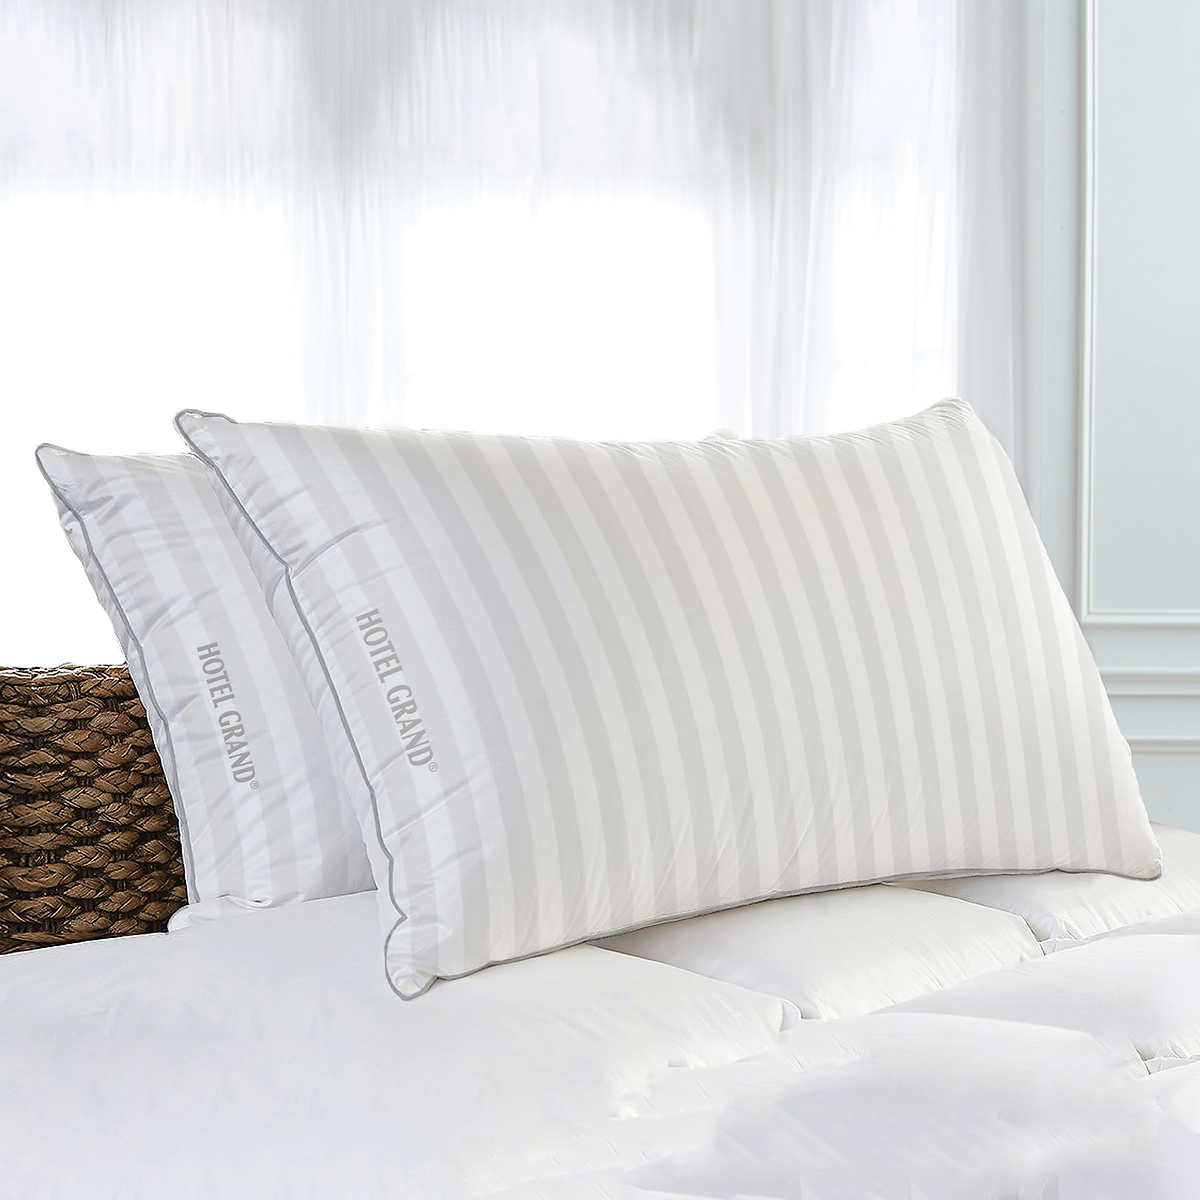 Size Jumbo King Hotel Grand Feather & Down Pillow 2-pack 